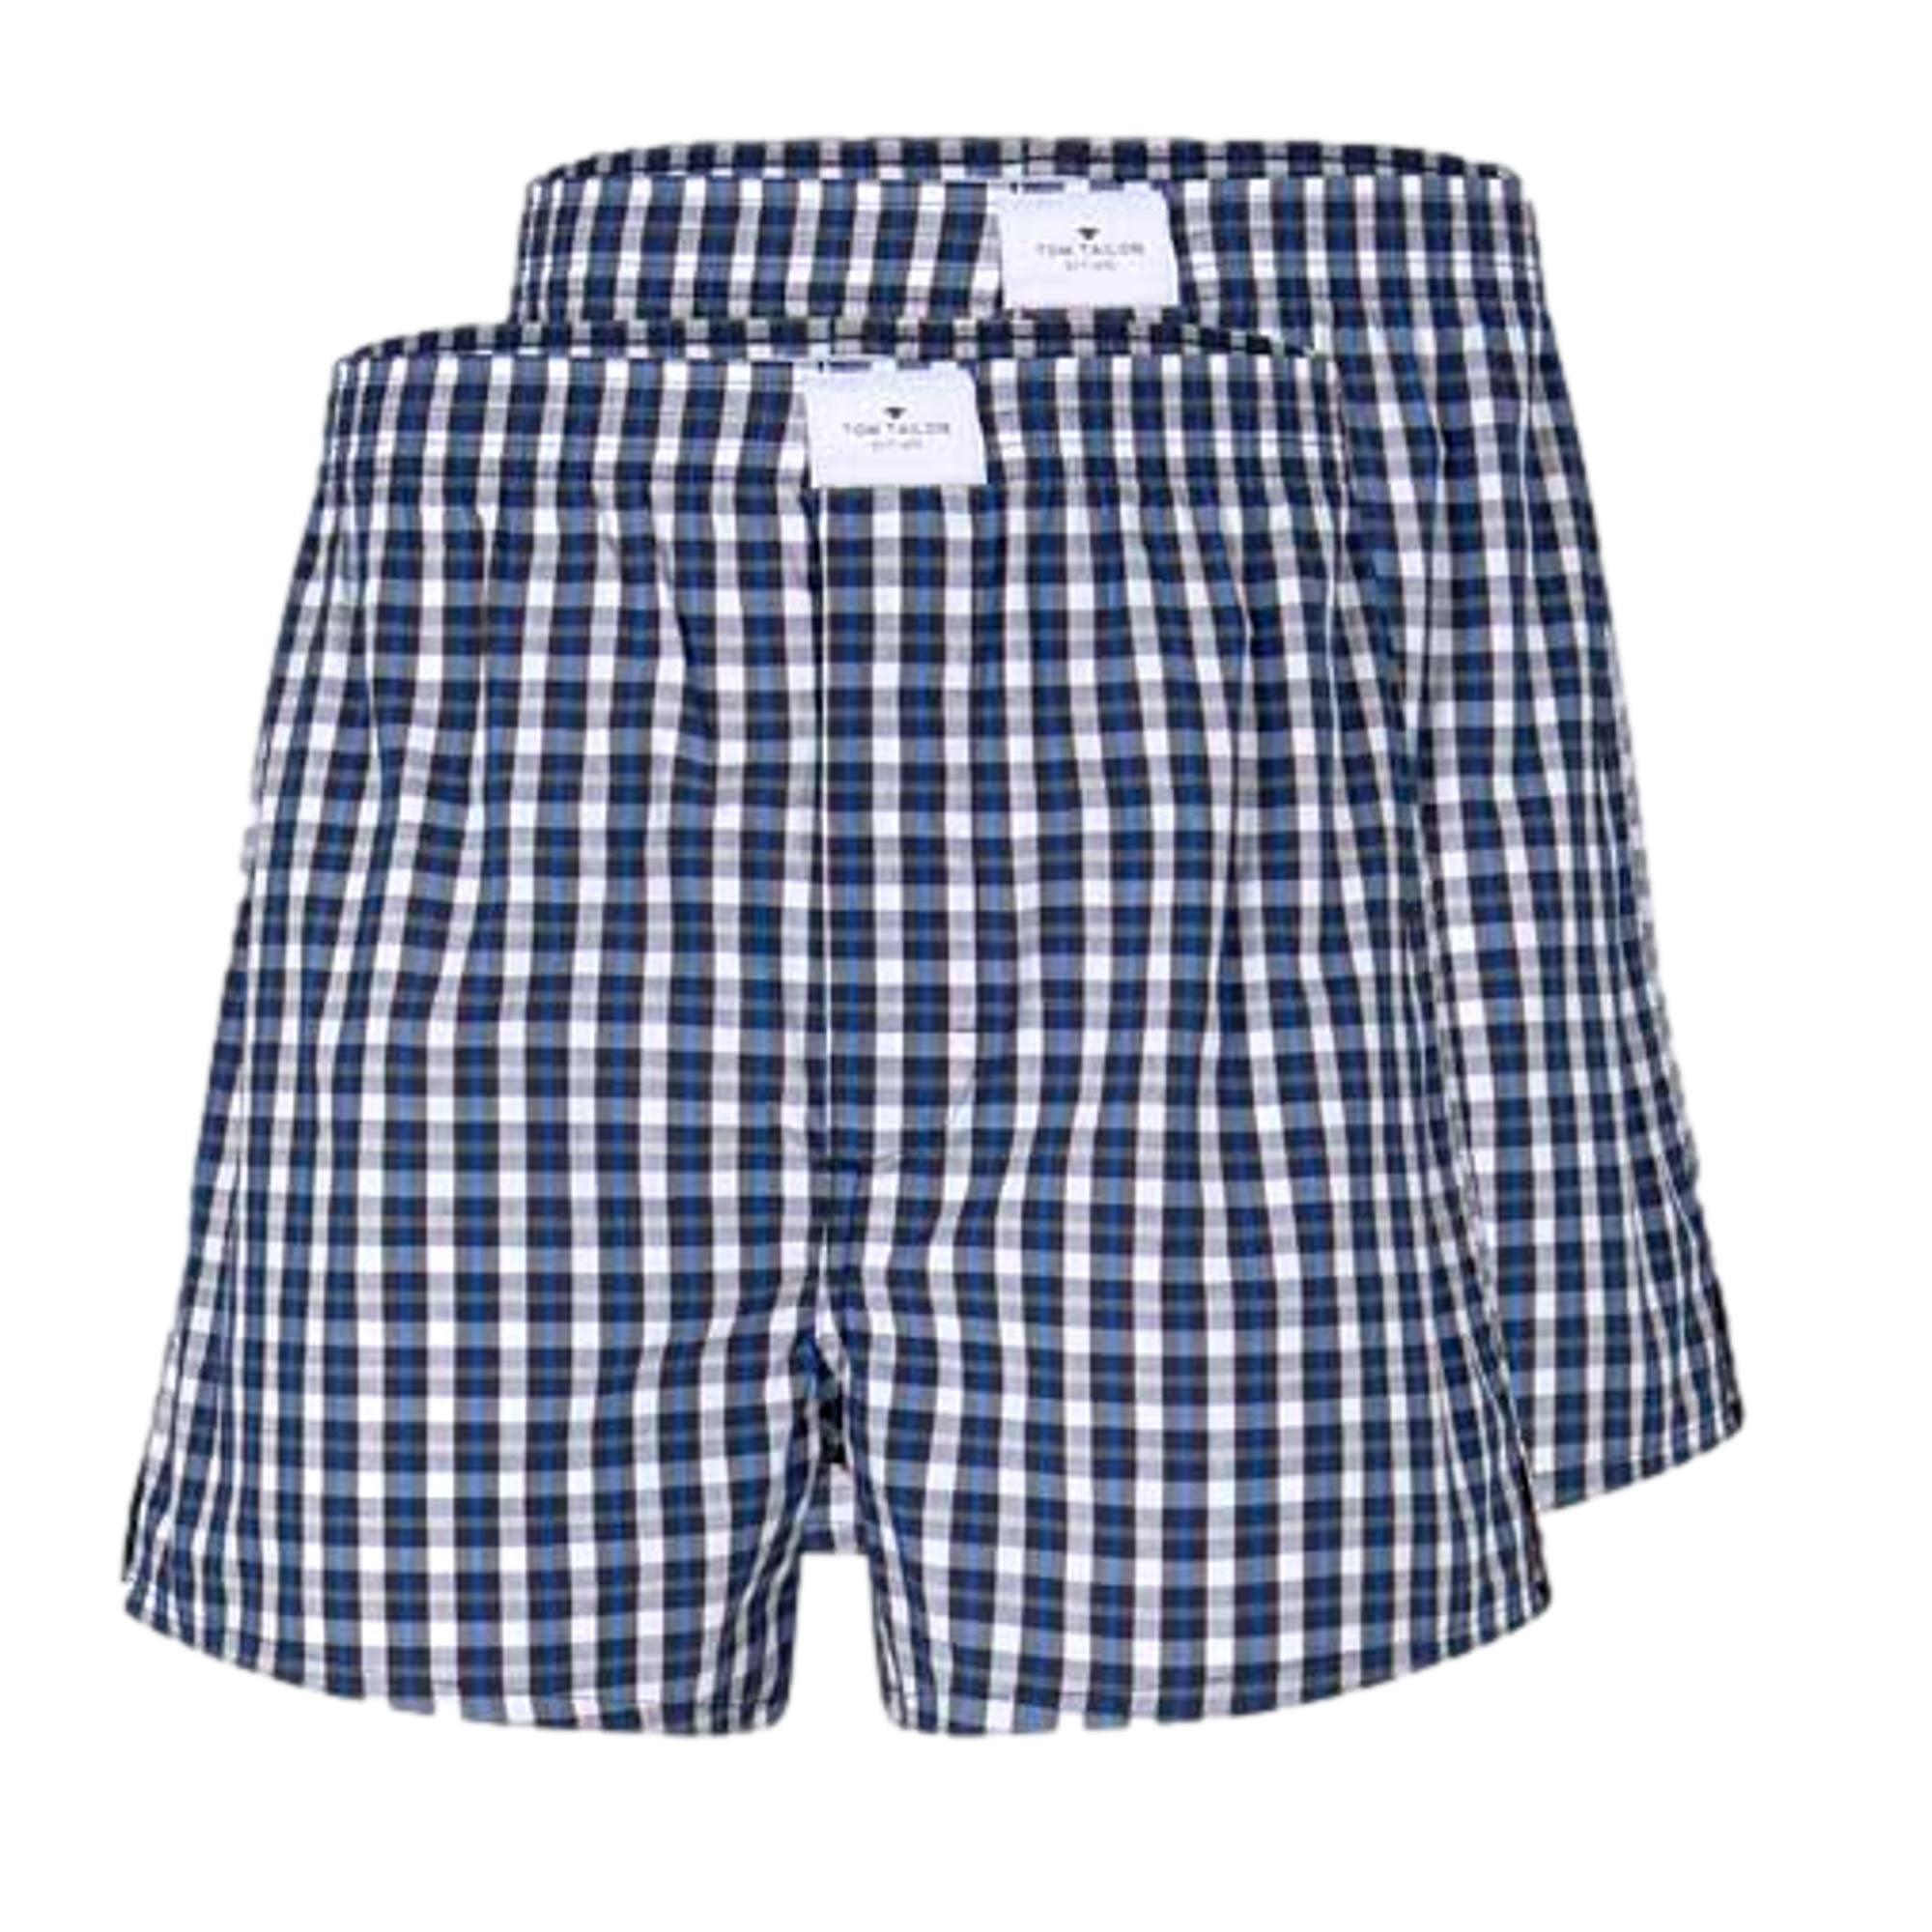 Tom Tailor Woven Boxer Shorts 2 Pack - Navy-Medium-Check - Utility Bear  Apparel & Accessories